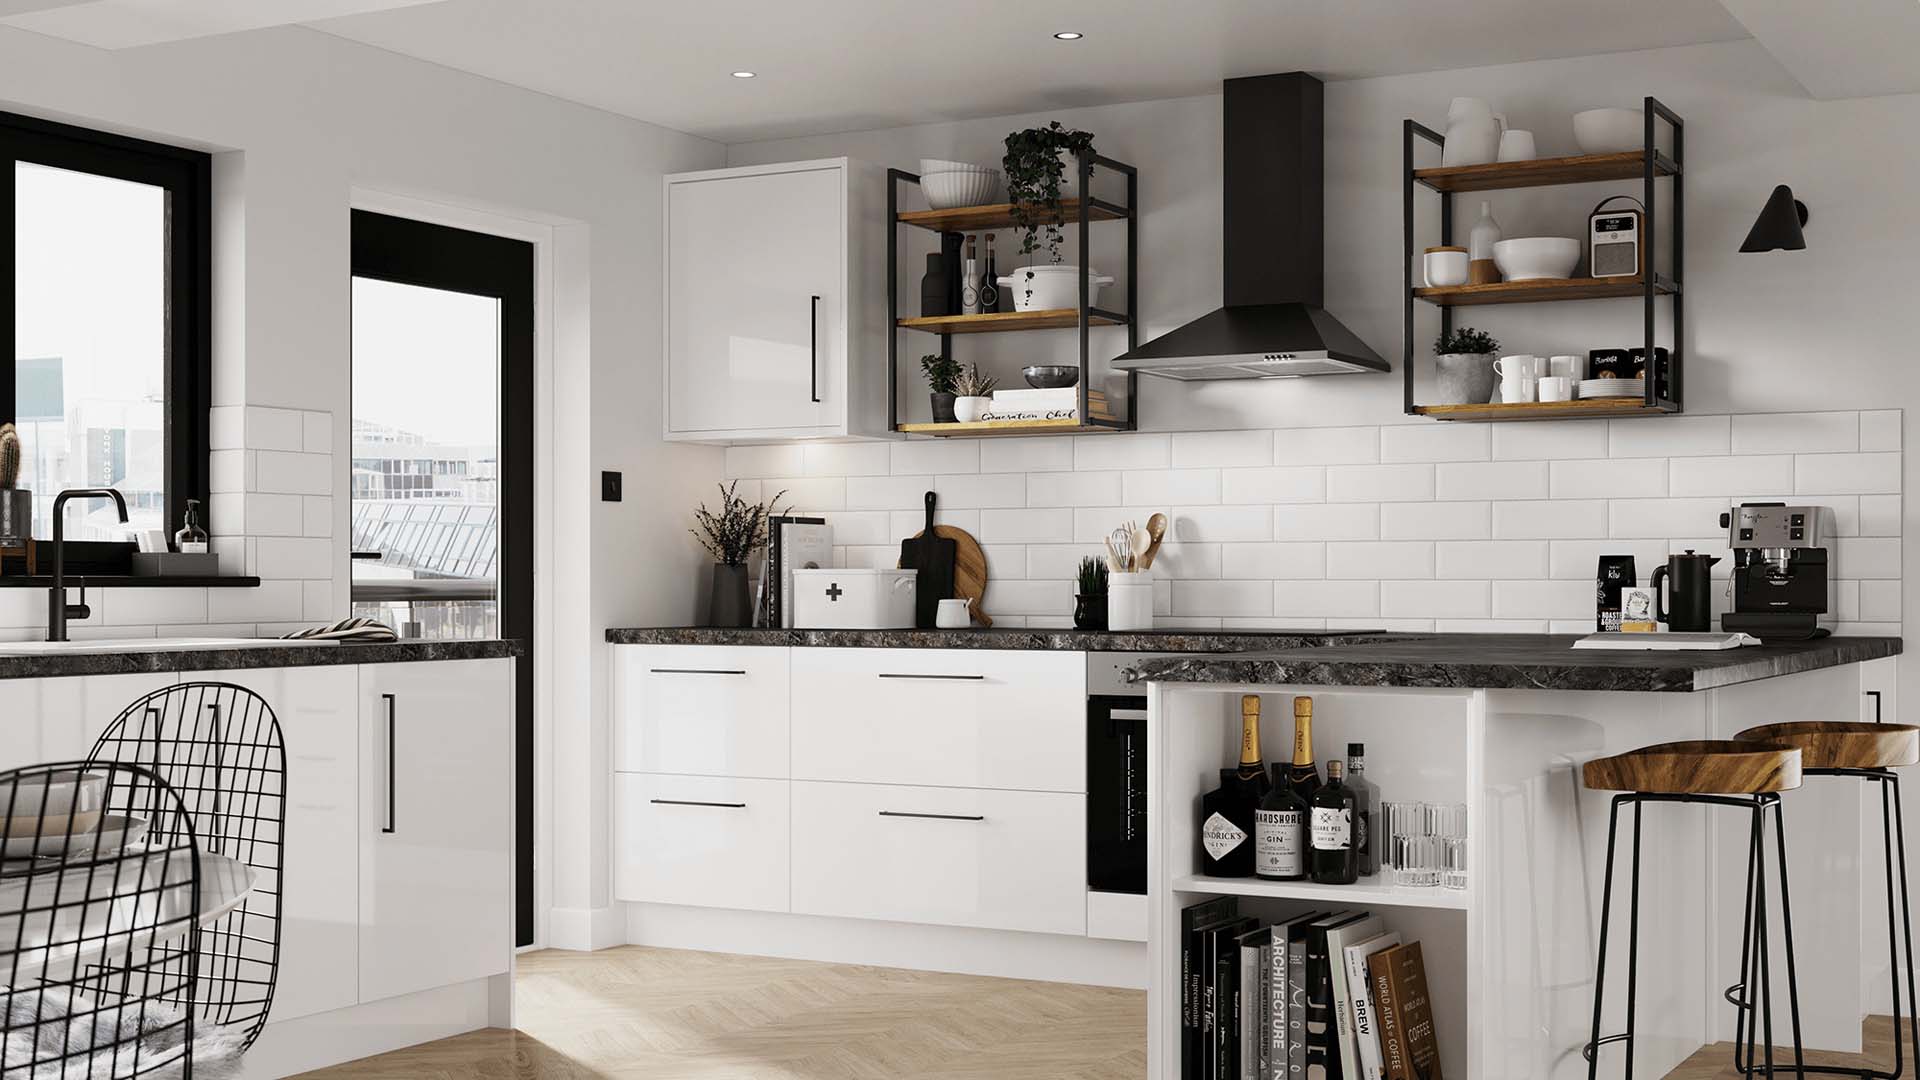 A monochromatic kitchen with white units and black counters